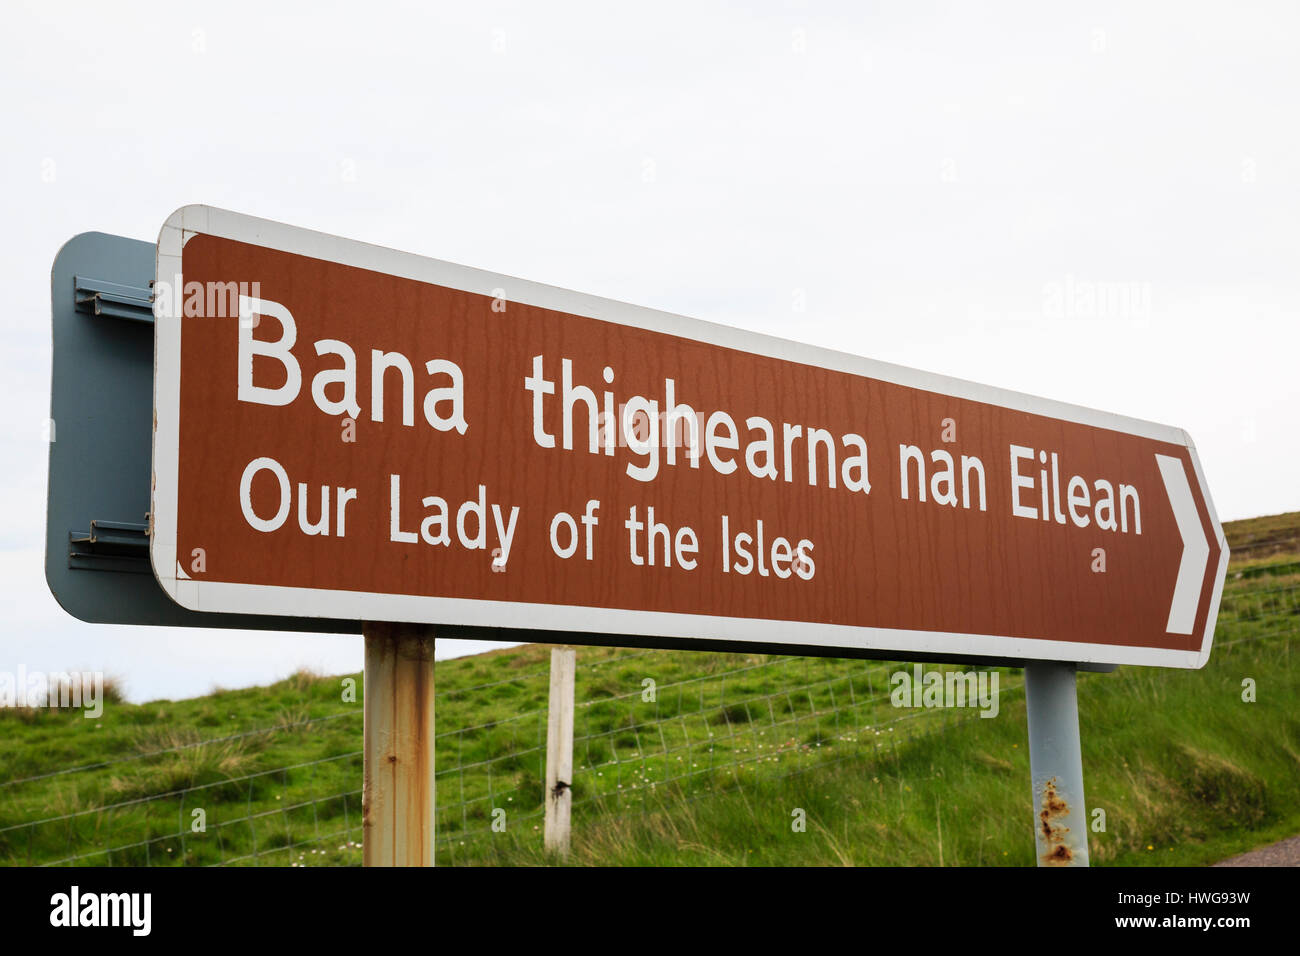 Bilingual brown tourist sign for Our Lady of the Isles statue, South Uist, Outer Hebrides, Western Isles, Scotland, UK, Britain Stock Photo